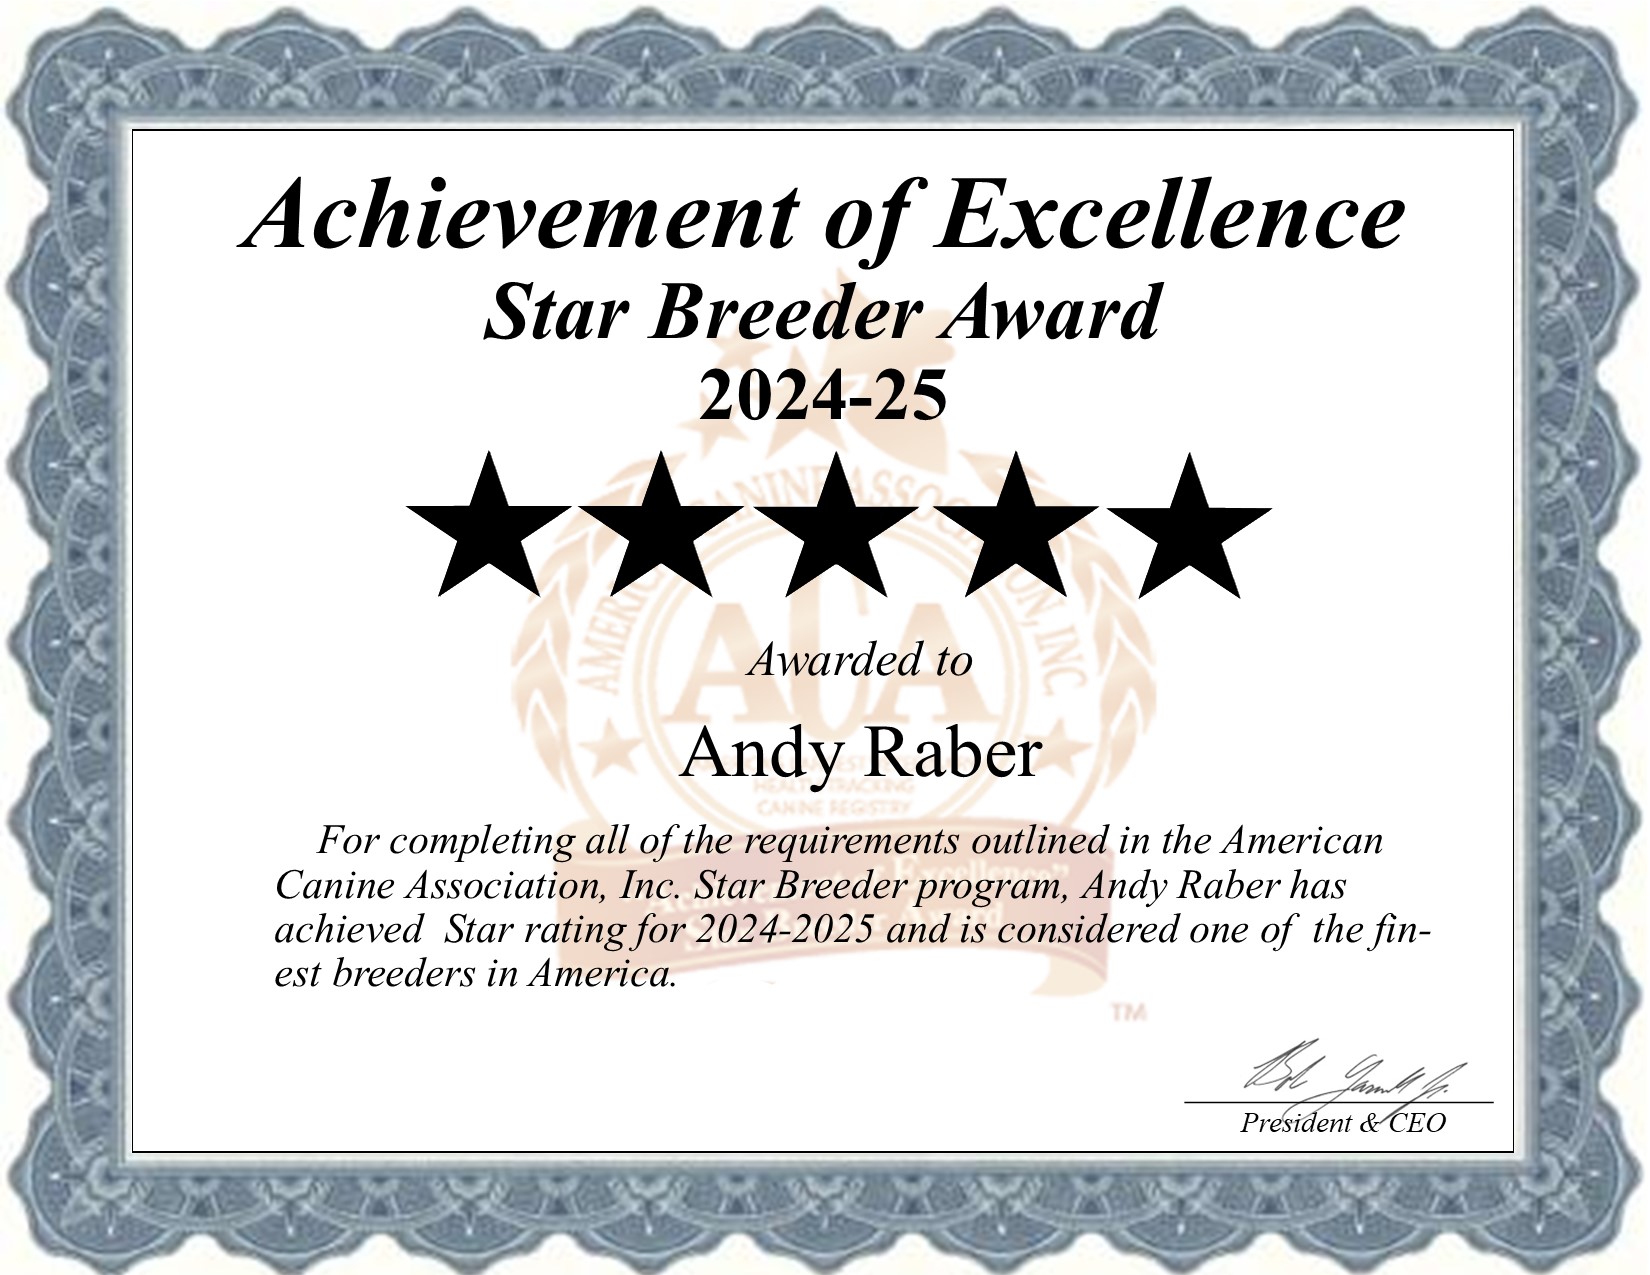 Andy, Raber, dog, breeder, star, certificate, Andy-Raber, Baltic, OH, Ohio, puppy, dog, kennels, mill, puppymill, usda, 5-star, aca, ica, registered, Maltese